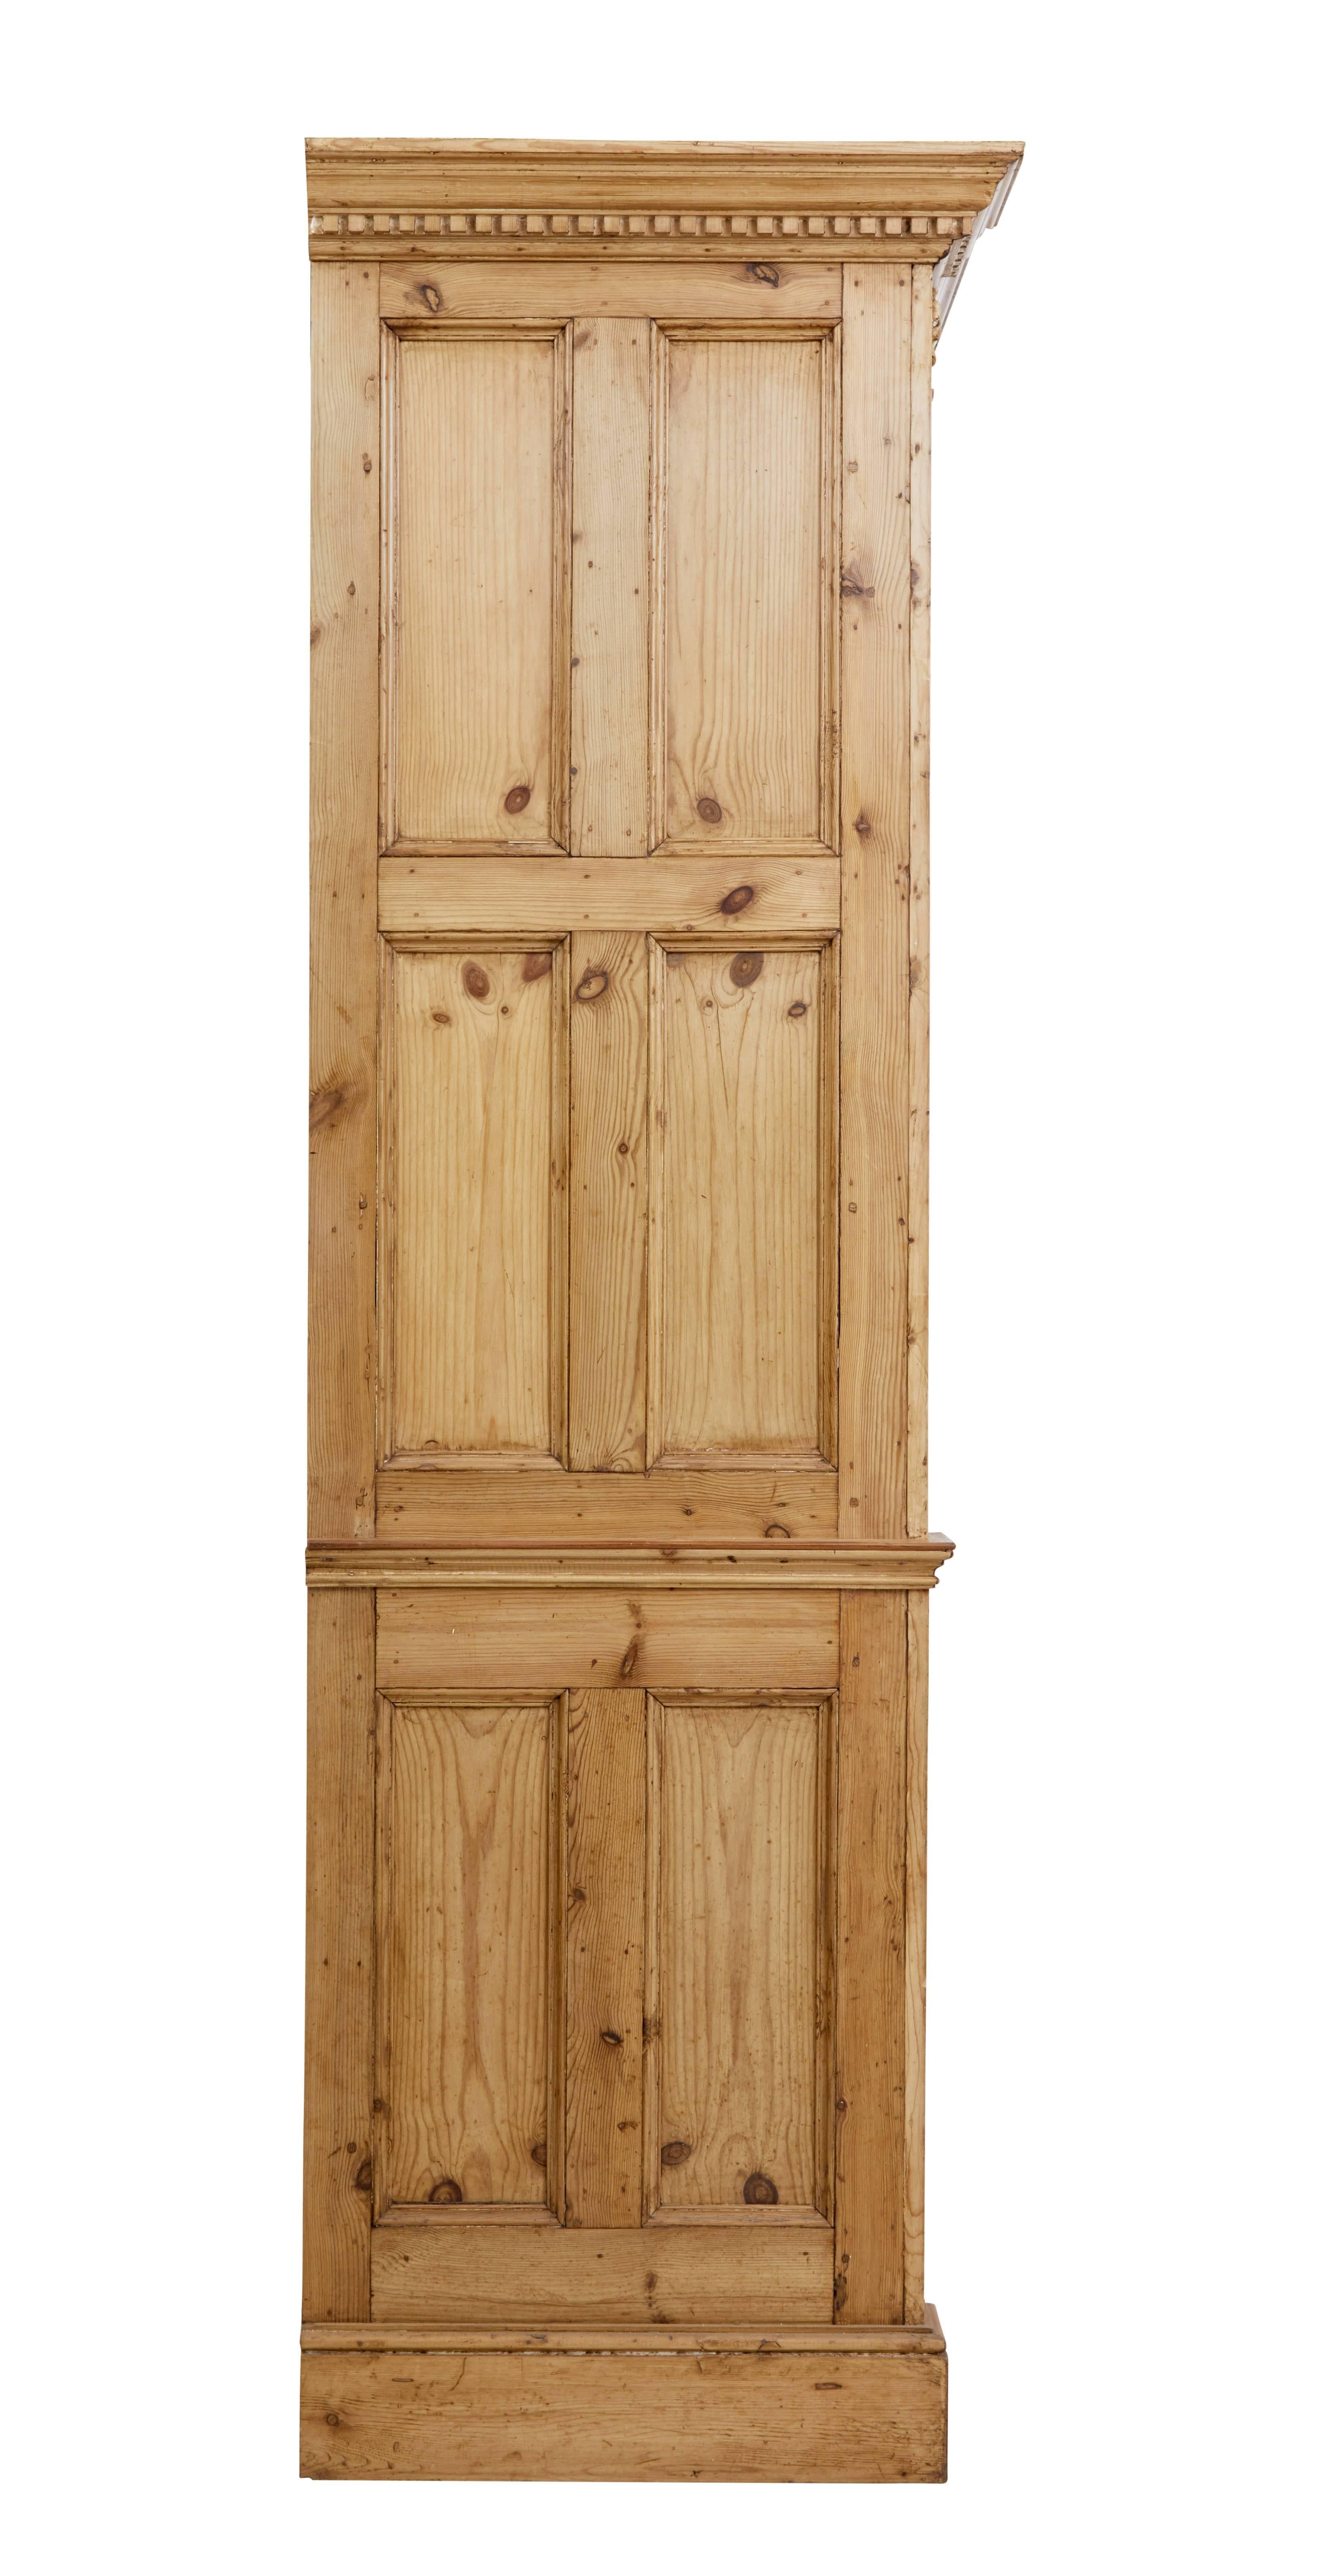 Woodwork Architectural early 19th century converted pine cabinet